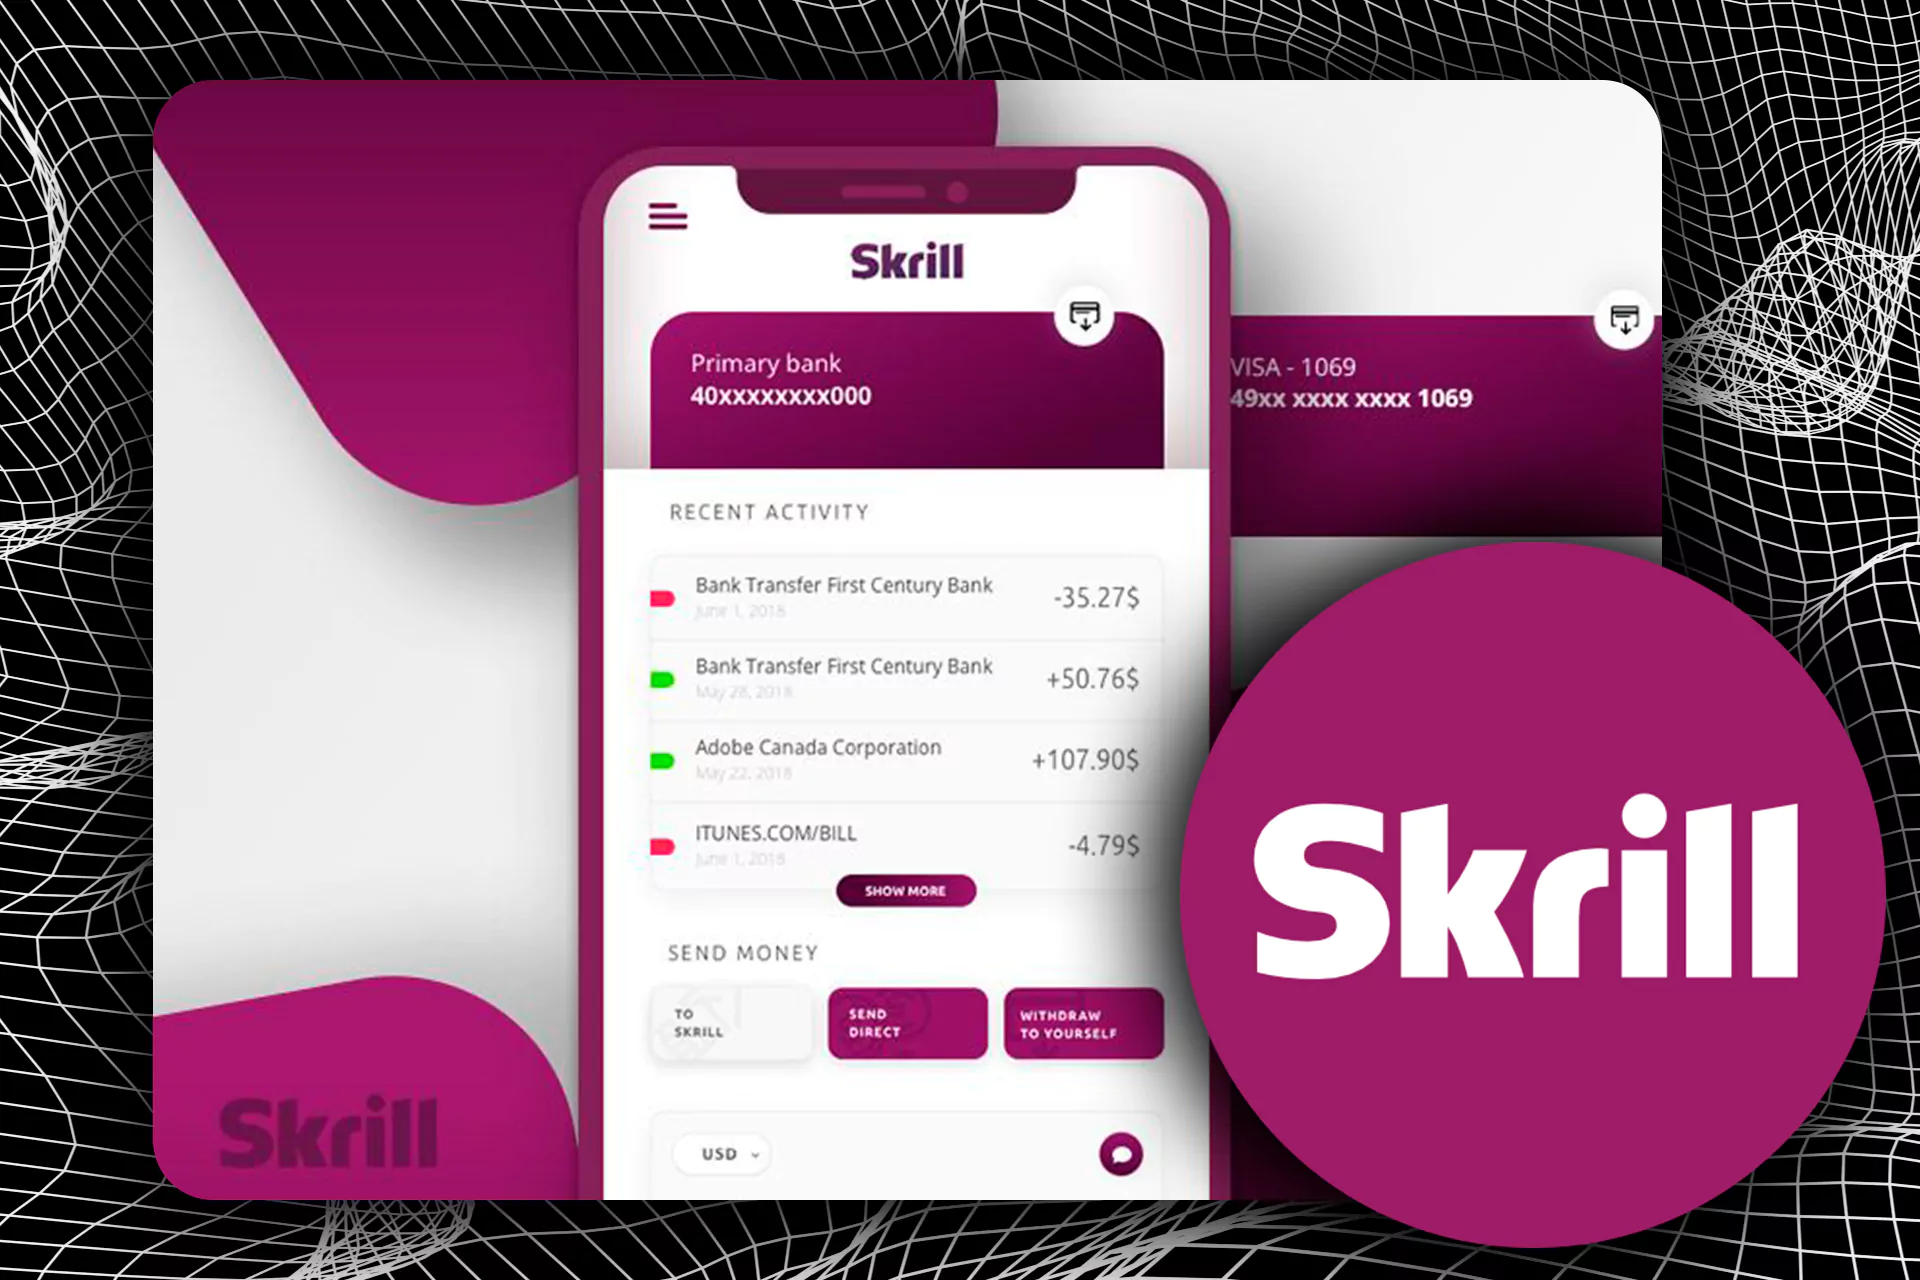 You can also use the world's most known payment system - Skrill.